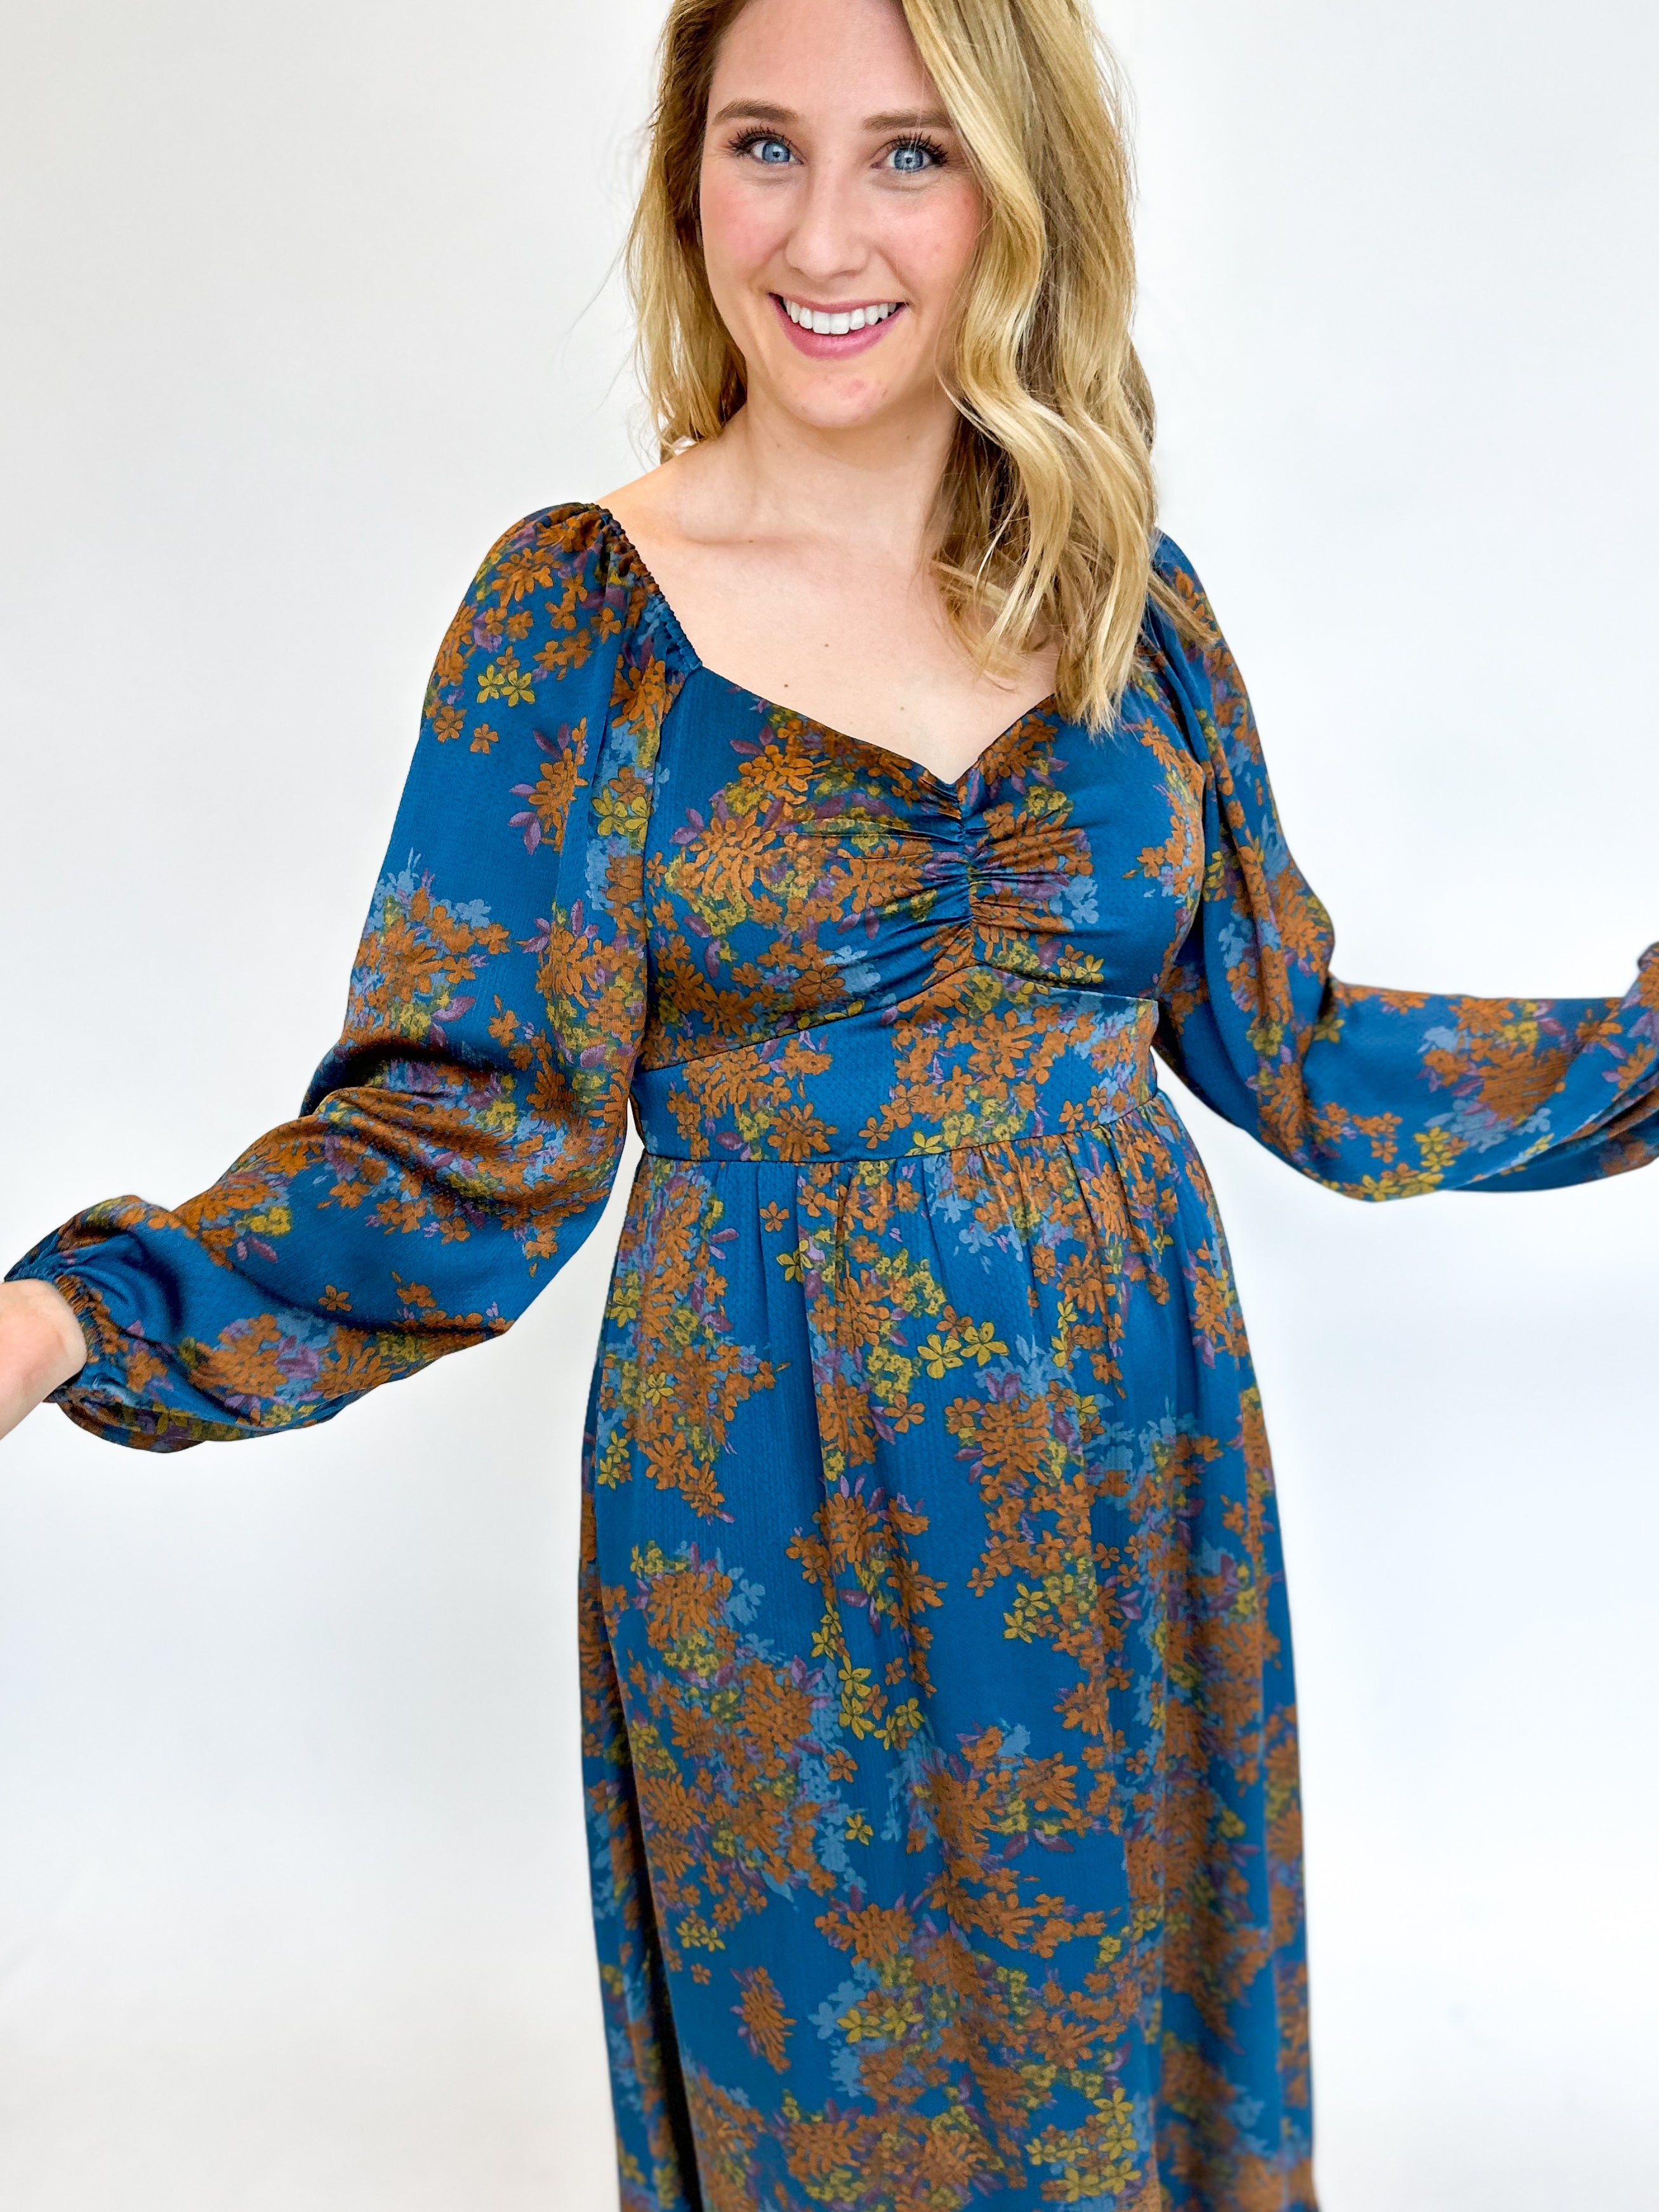 Deep Teal Floral Midi Dress-500 Midi-SKIES ARE BLUE-July & June Women's Fashion Boutique Located in San Antonio, Texas